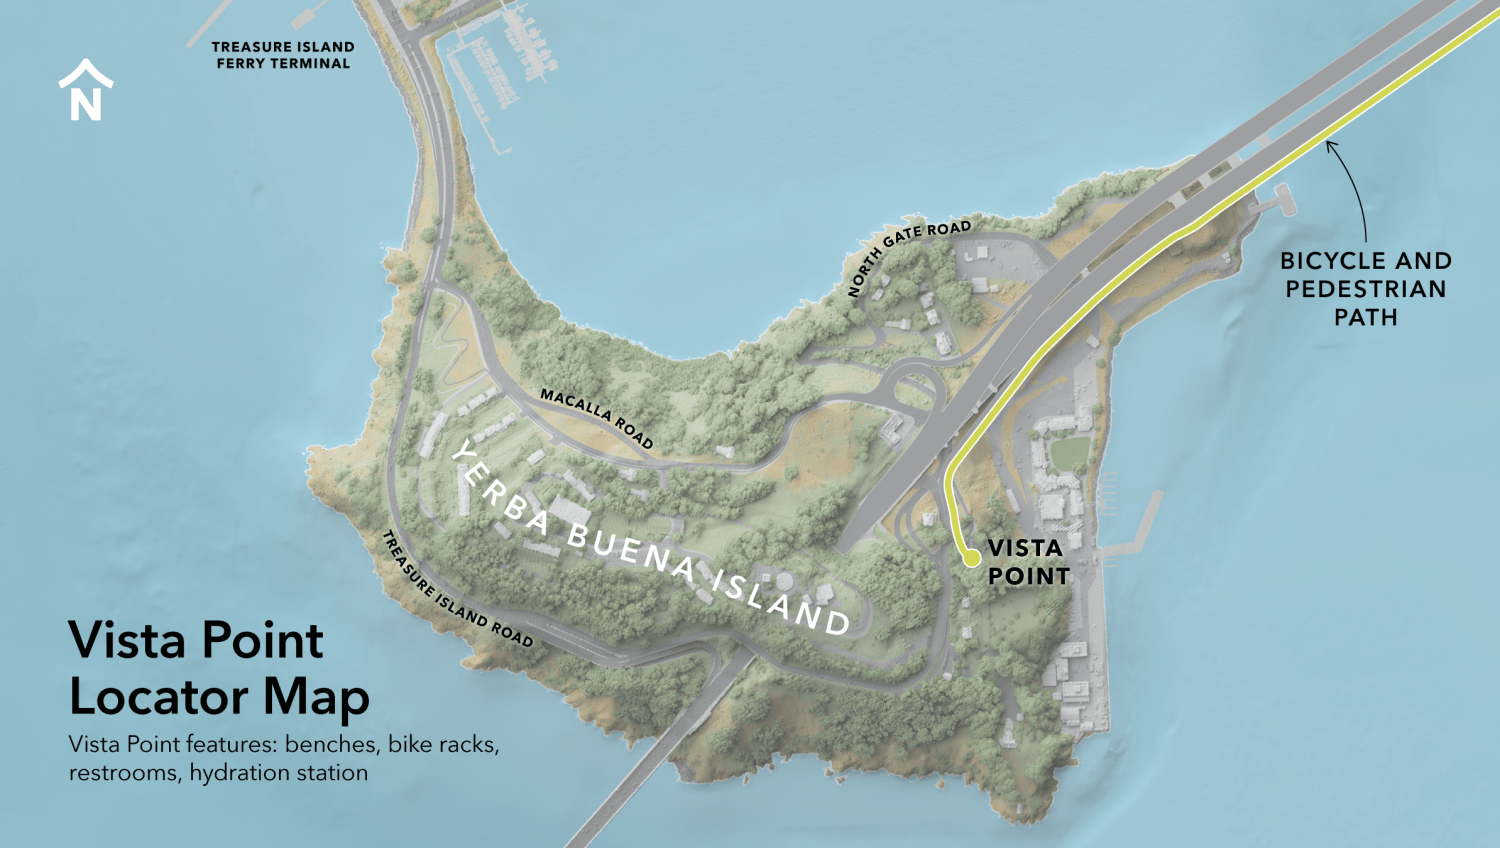 Map of Yerba Buena Island with north pointing up, titled "Vista Point Locator Map; Vista Point features: benches, bike racks, restrooms, hydration station." A green line labeled "Bicycle and Pedestrian Path" runs along the south side of the Bay Bridge east span to Vista Point, just south of where the bike/pedestrian path touches down on the island.